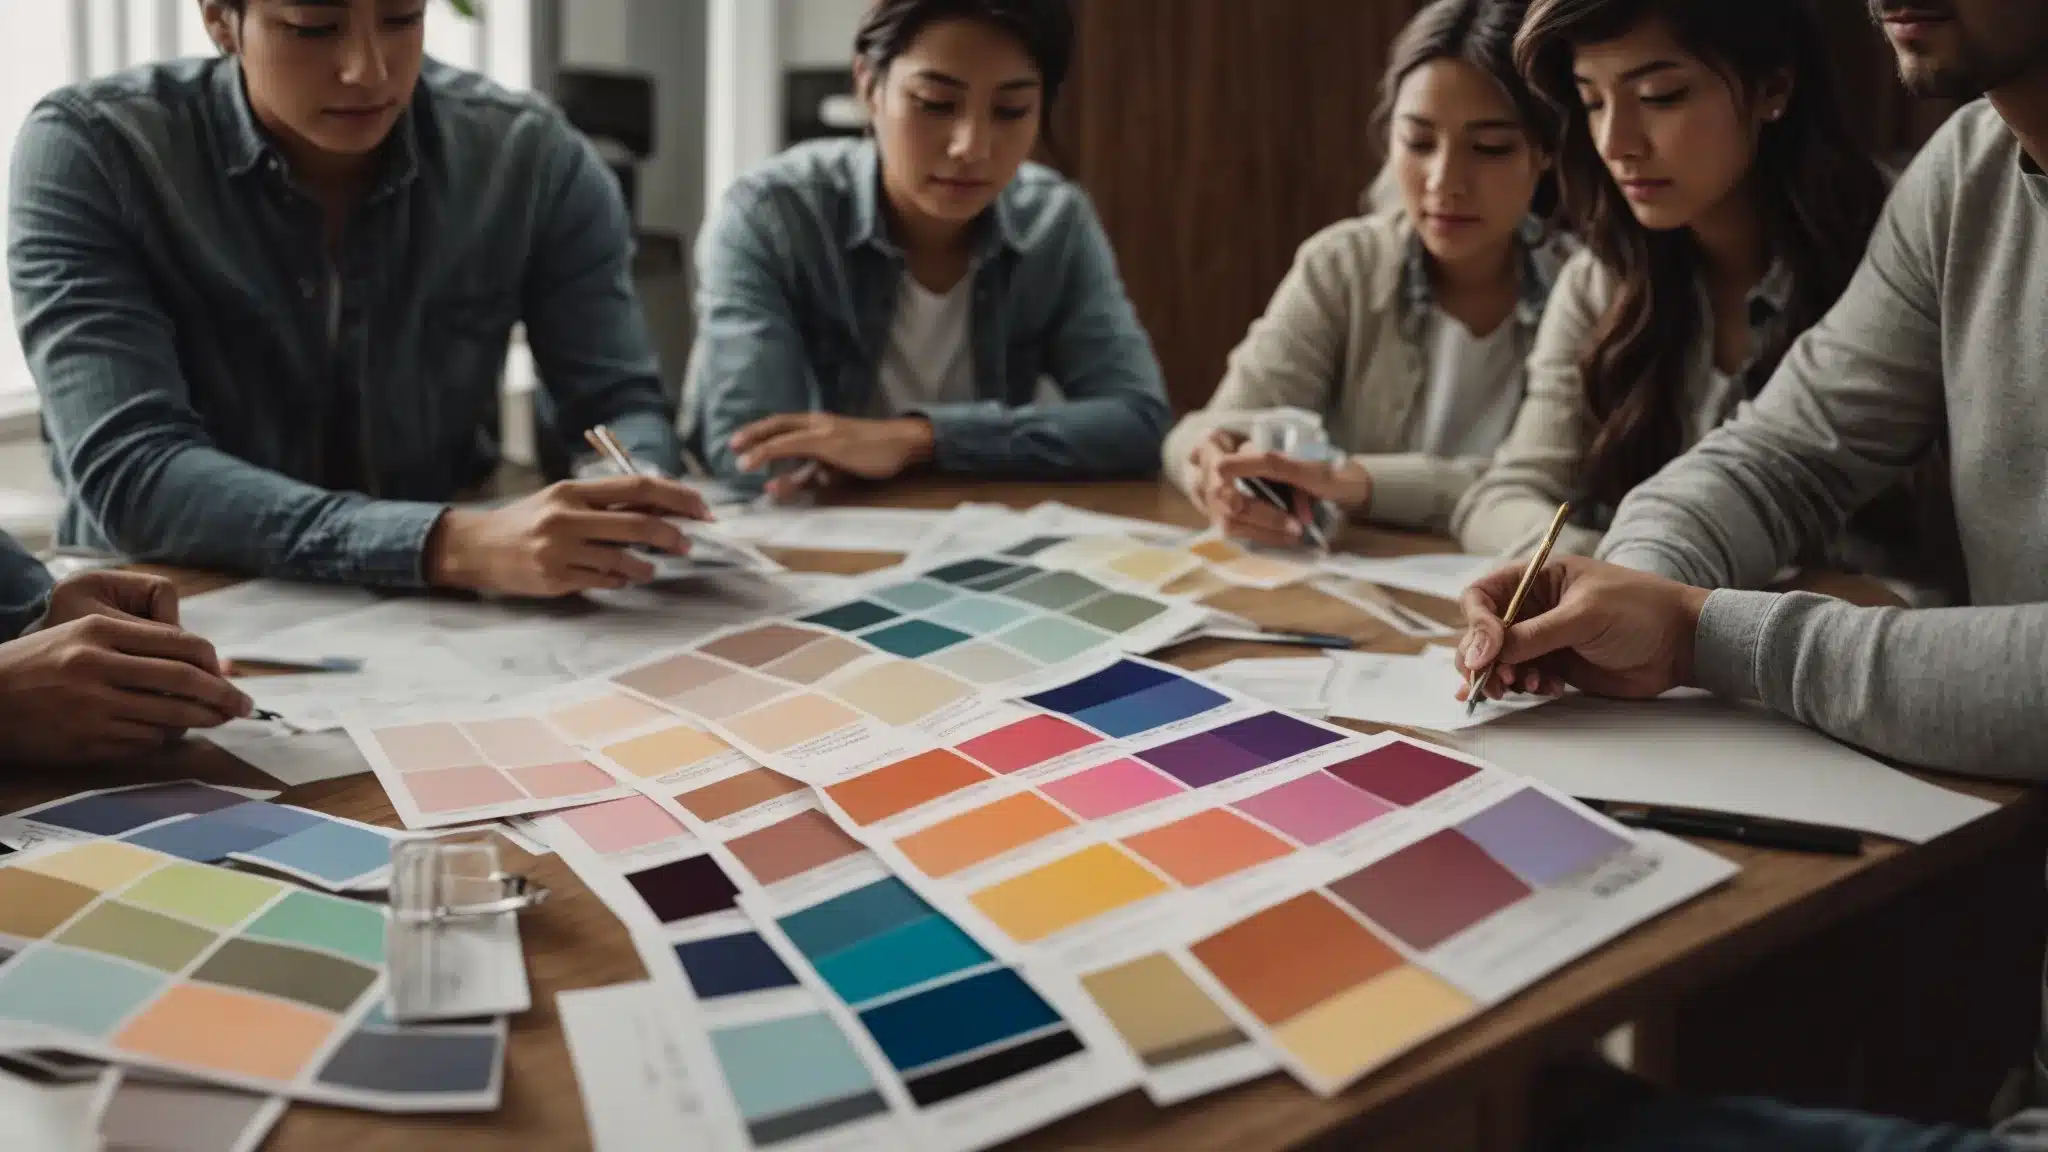 A Group Of Designers Brainstorming With Color Swatches And Mock-Up Materials Spread Across A Conference Table.